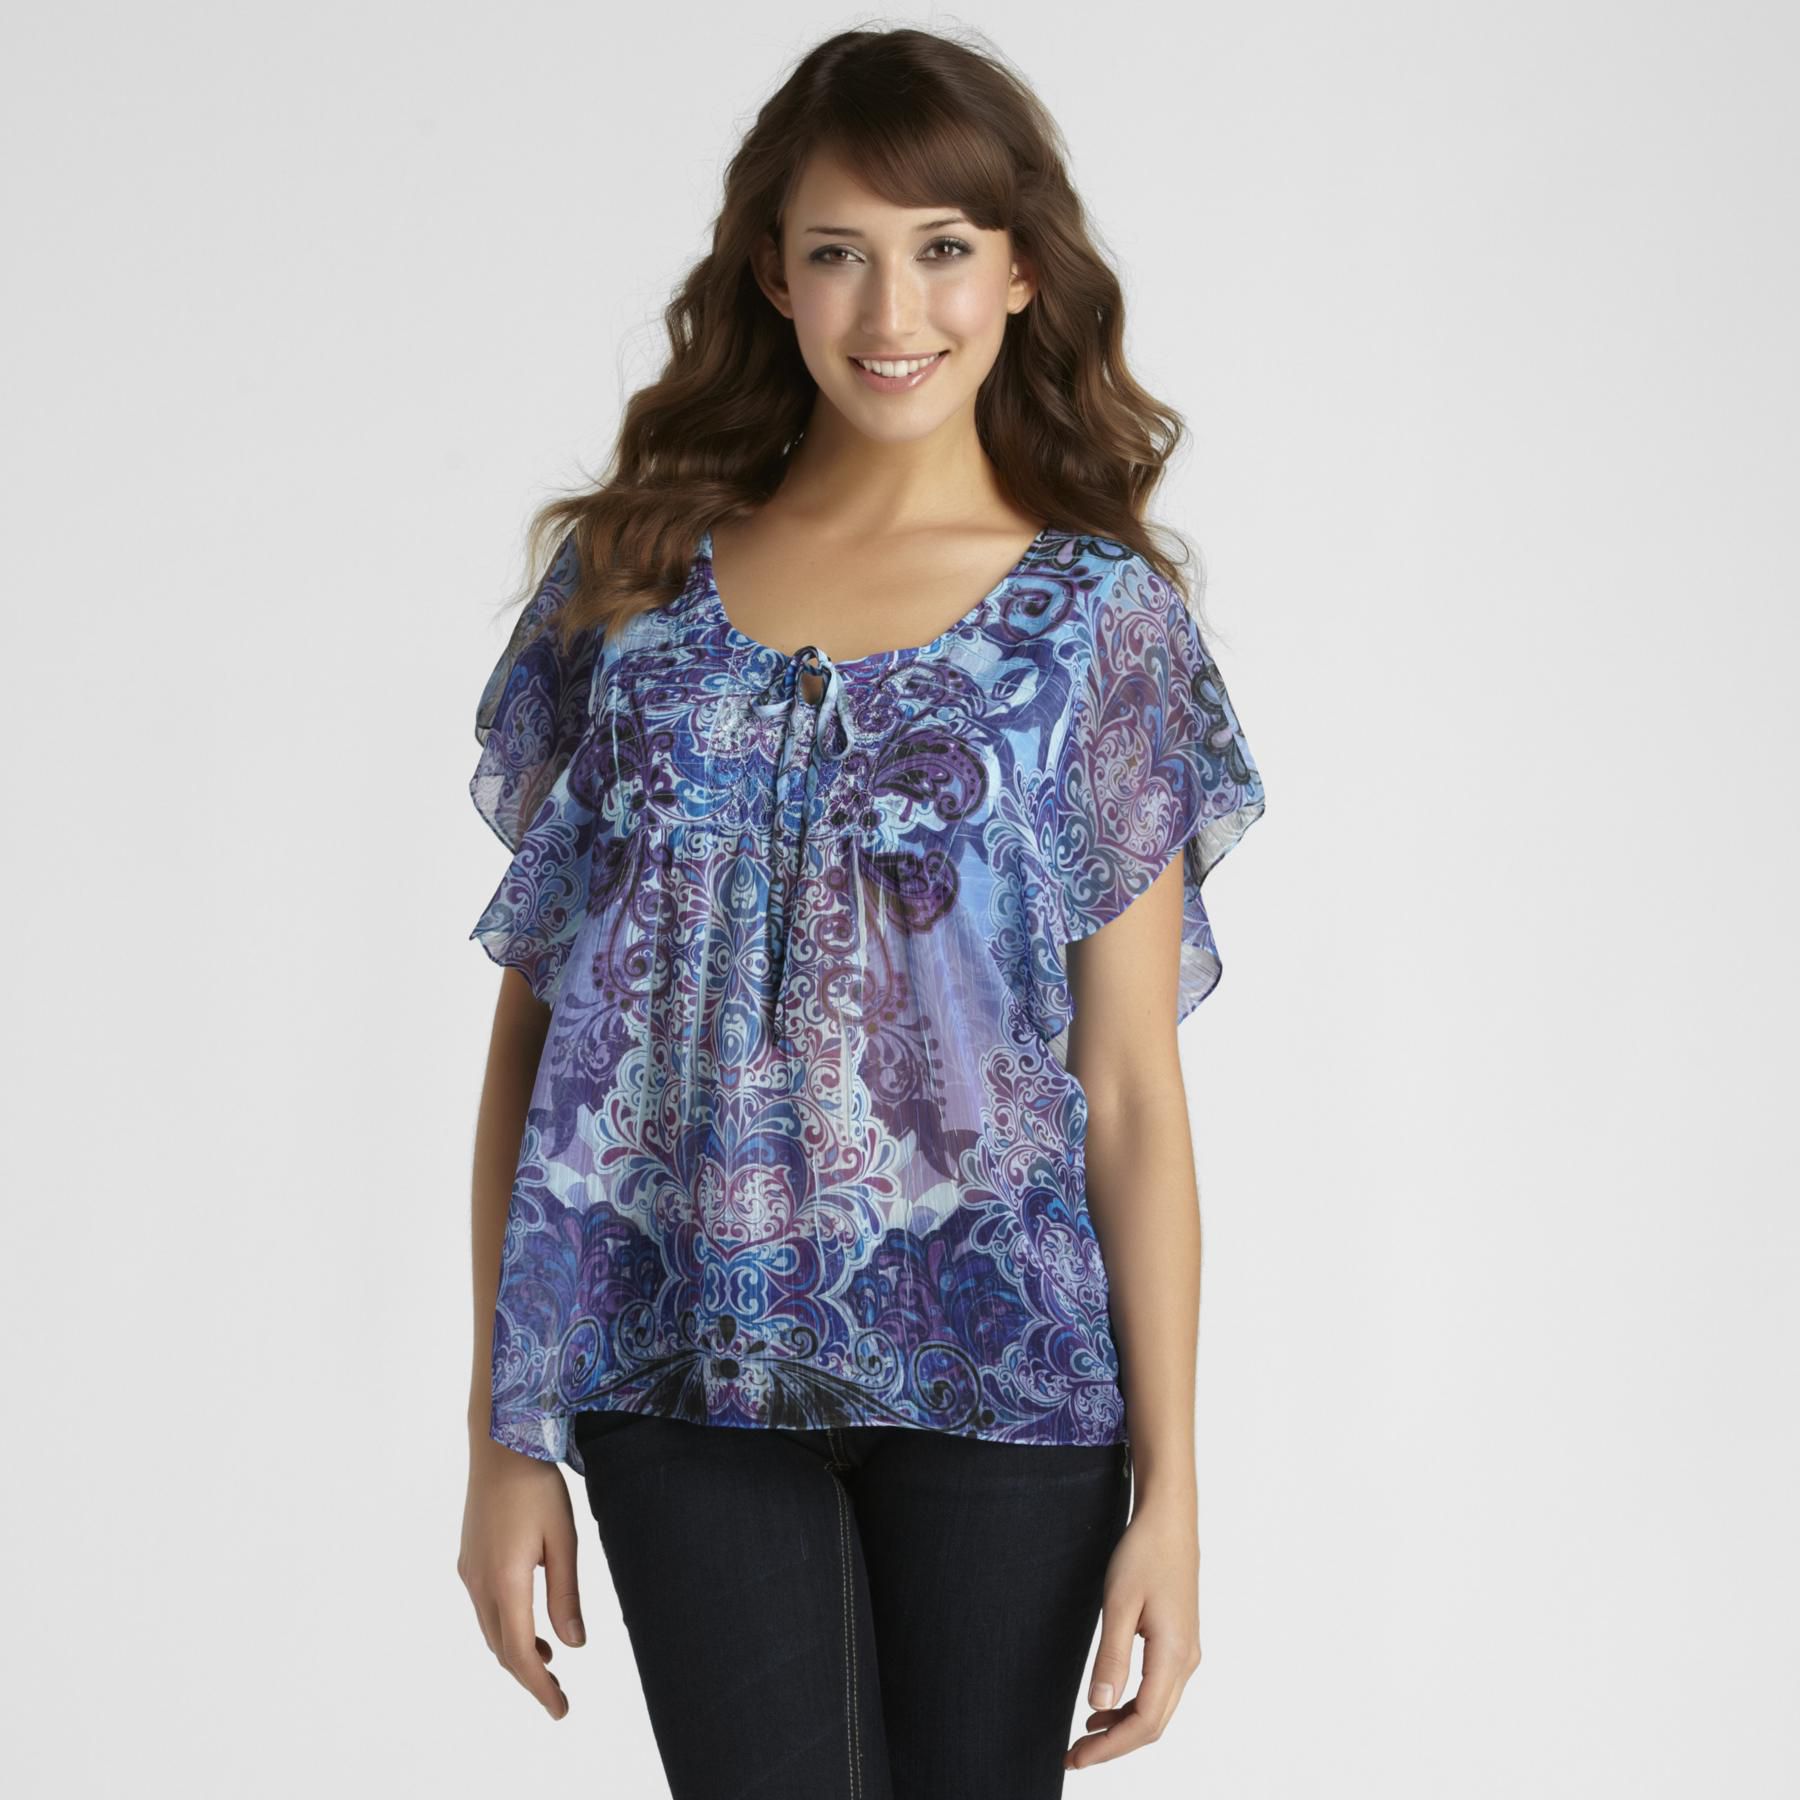 Live and Let Live Women's Sheer Short-Sleeve Blouse with Keyhole Front Tie.